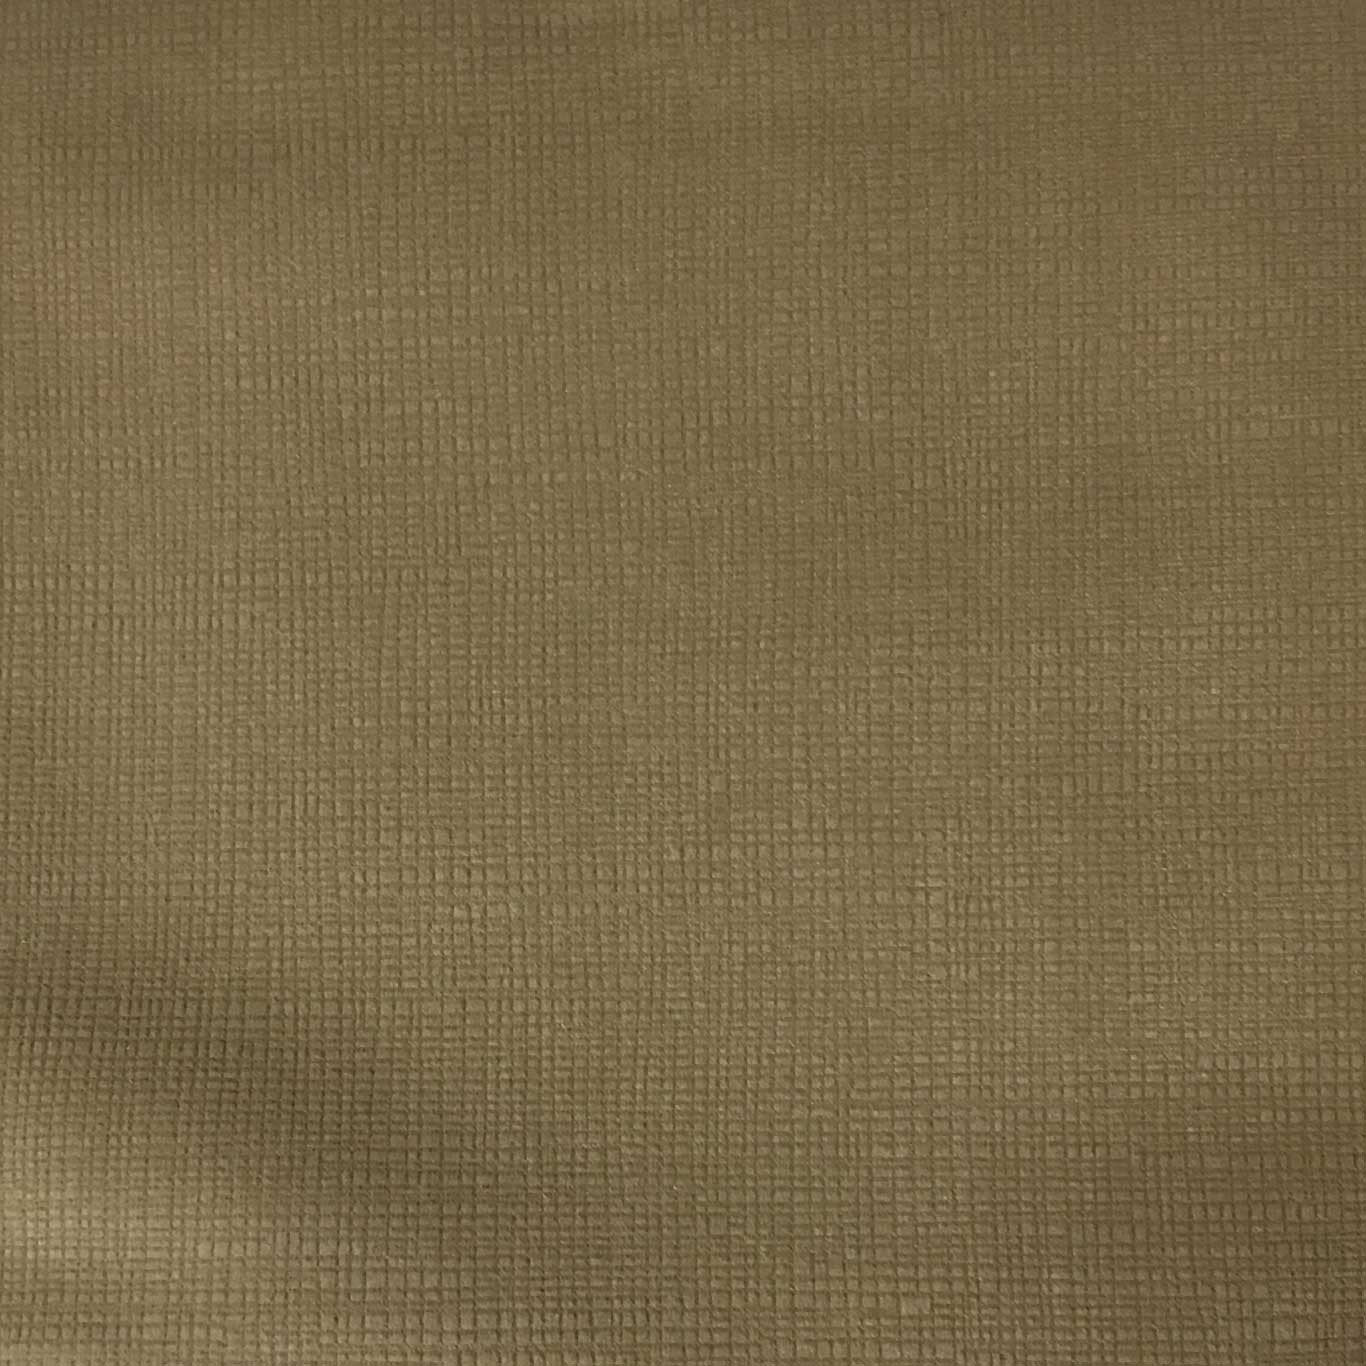 Creek - Textured Microfiber Velvet Upholstery Fabric by the Yard